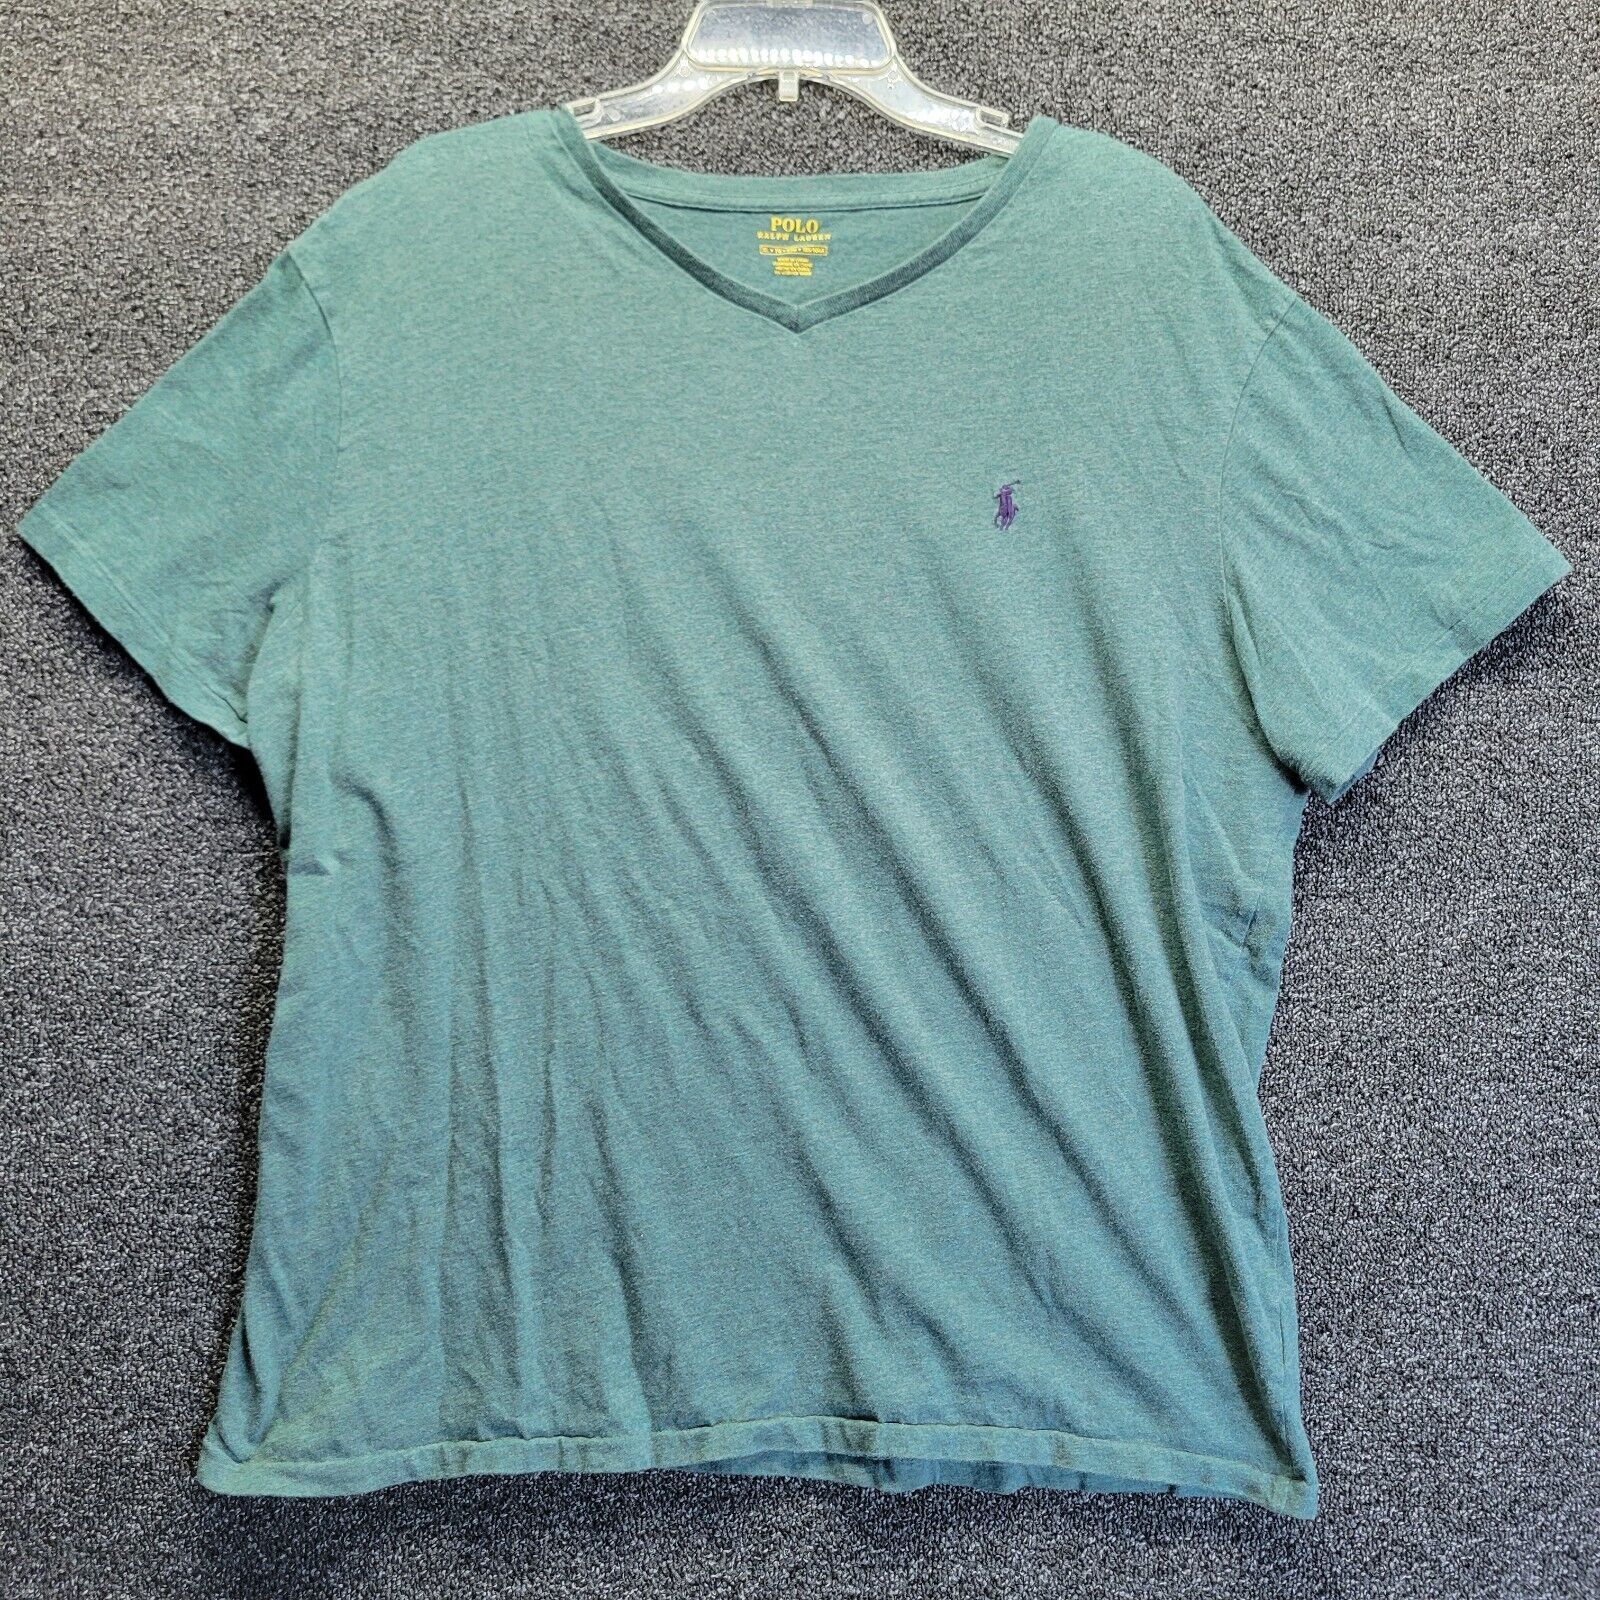 Primary image for Polo Ralph Lauren V-neck T-shirt Adult Men's Size XL - 100% Cotton - Grey